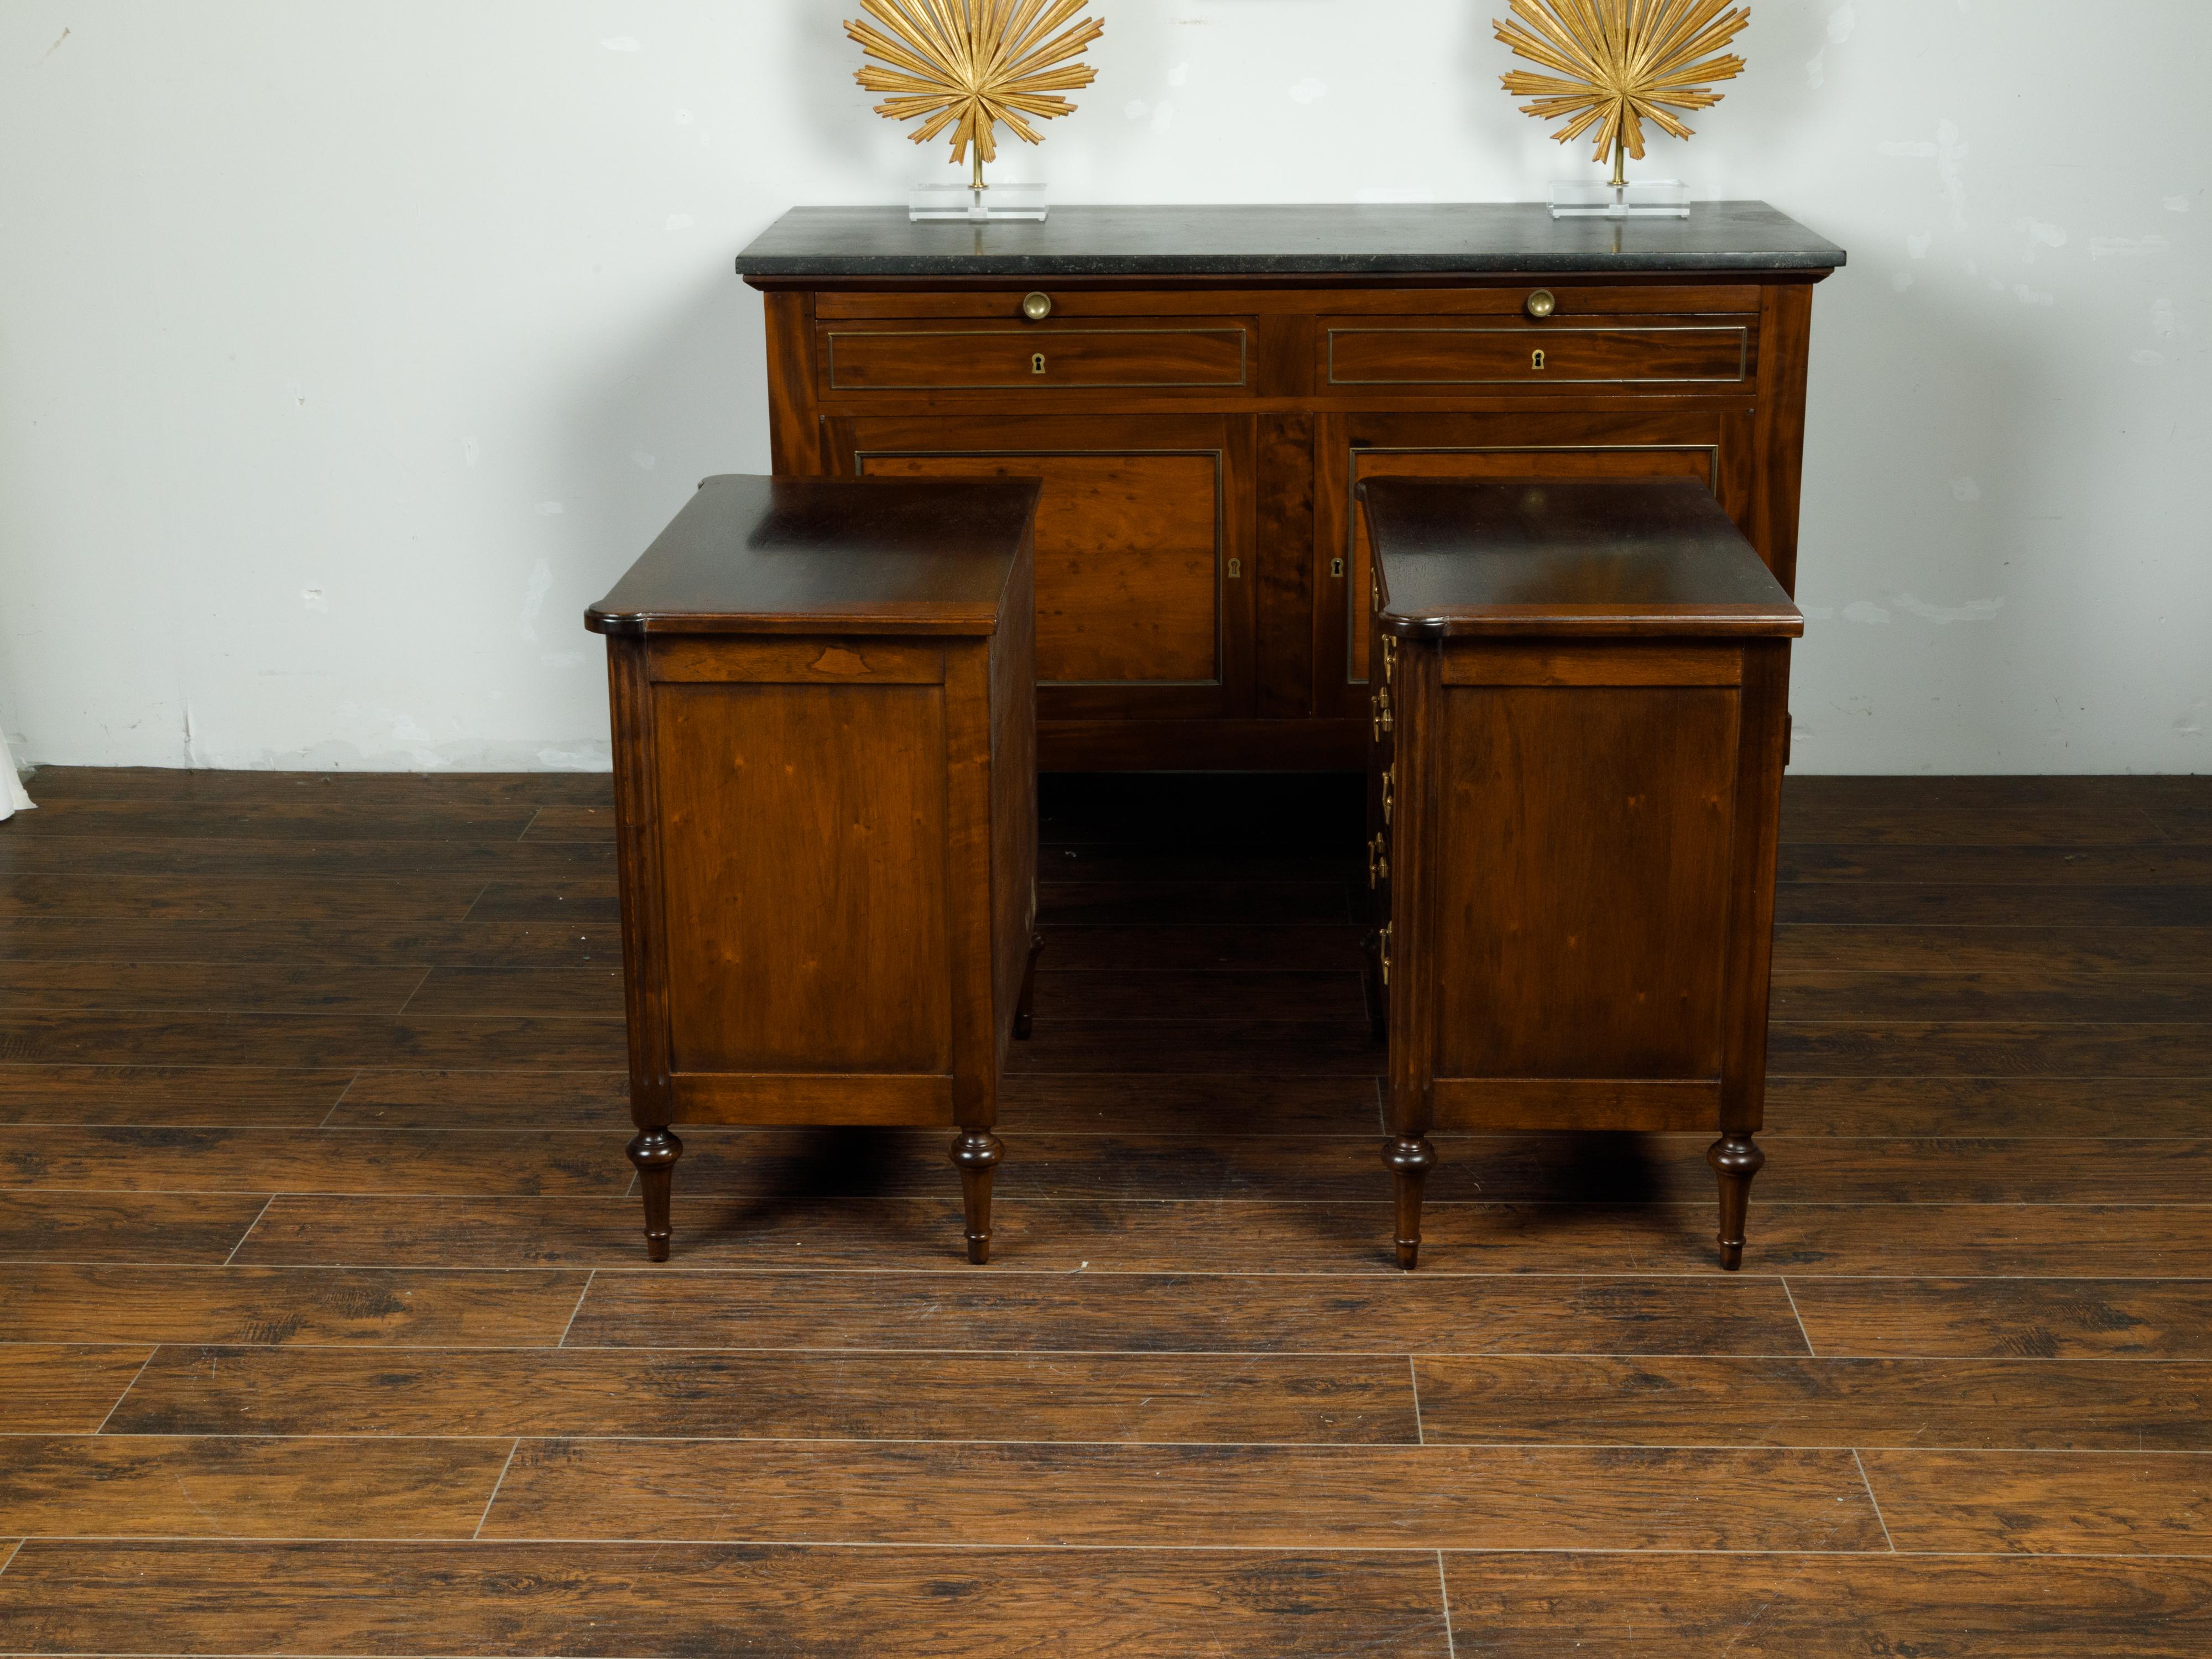 Pair of English Vintage Mahogany Commodes with Four Drawers and Brass Hardware 1